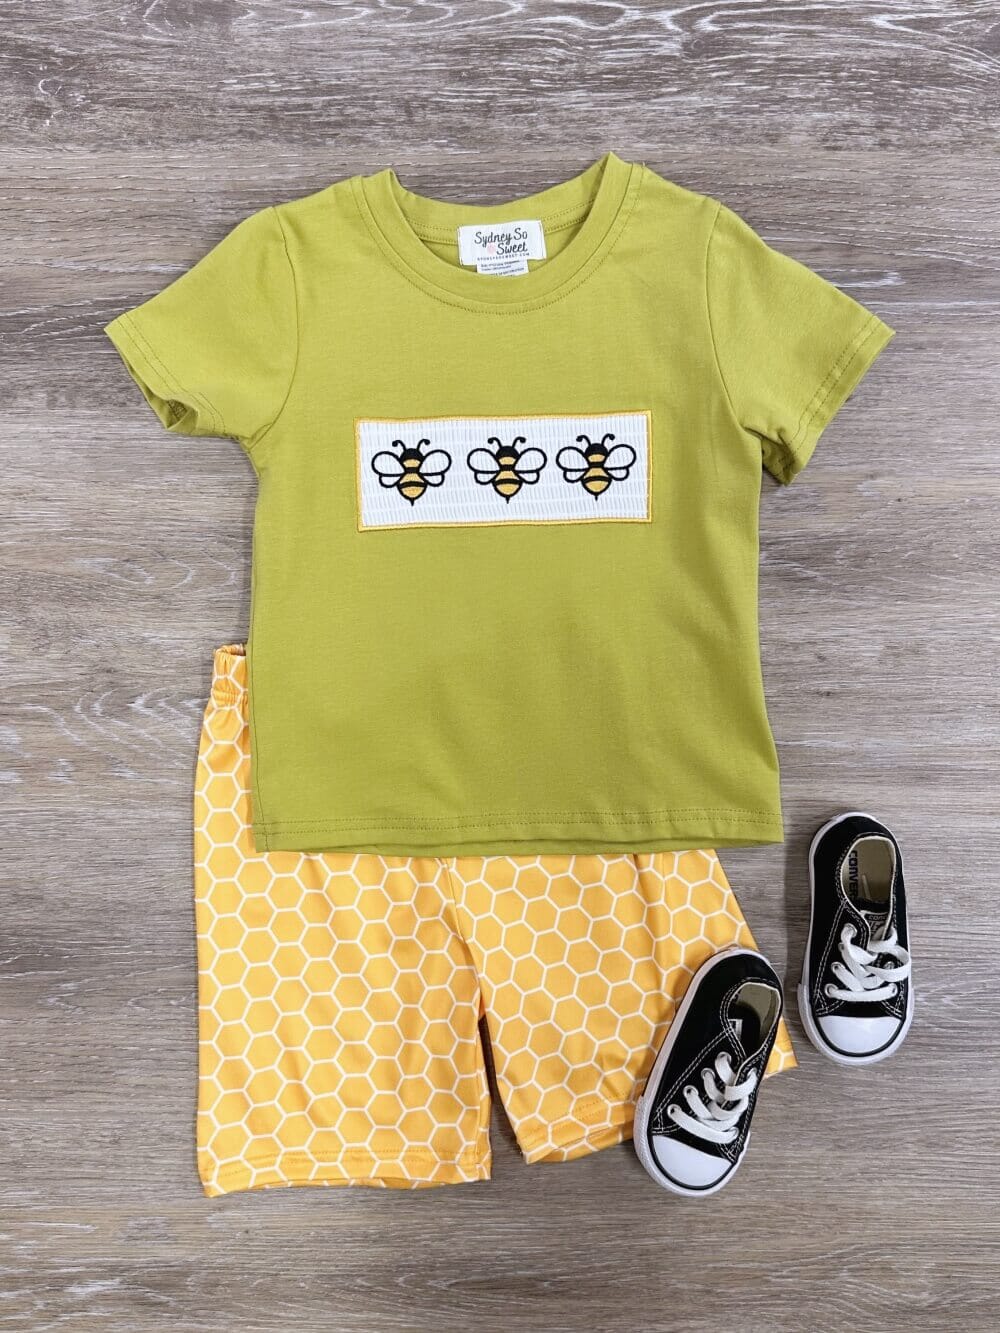 Busy Bee Yellow & Green Boys Shorts Outfit - Sydney So Sweet